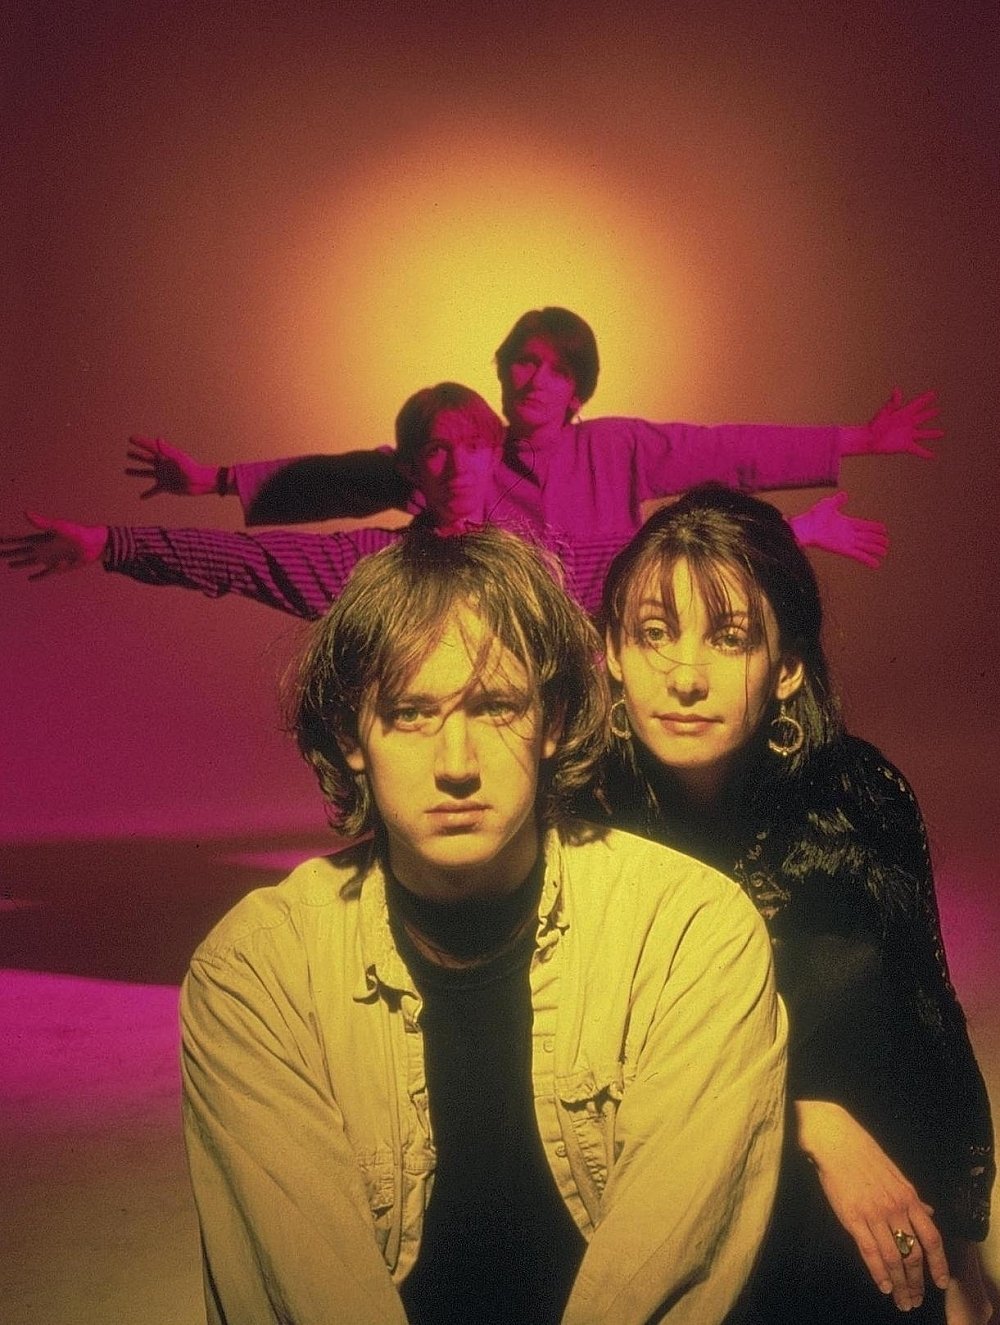 my bloody valentine music, videos, stats, and photos